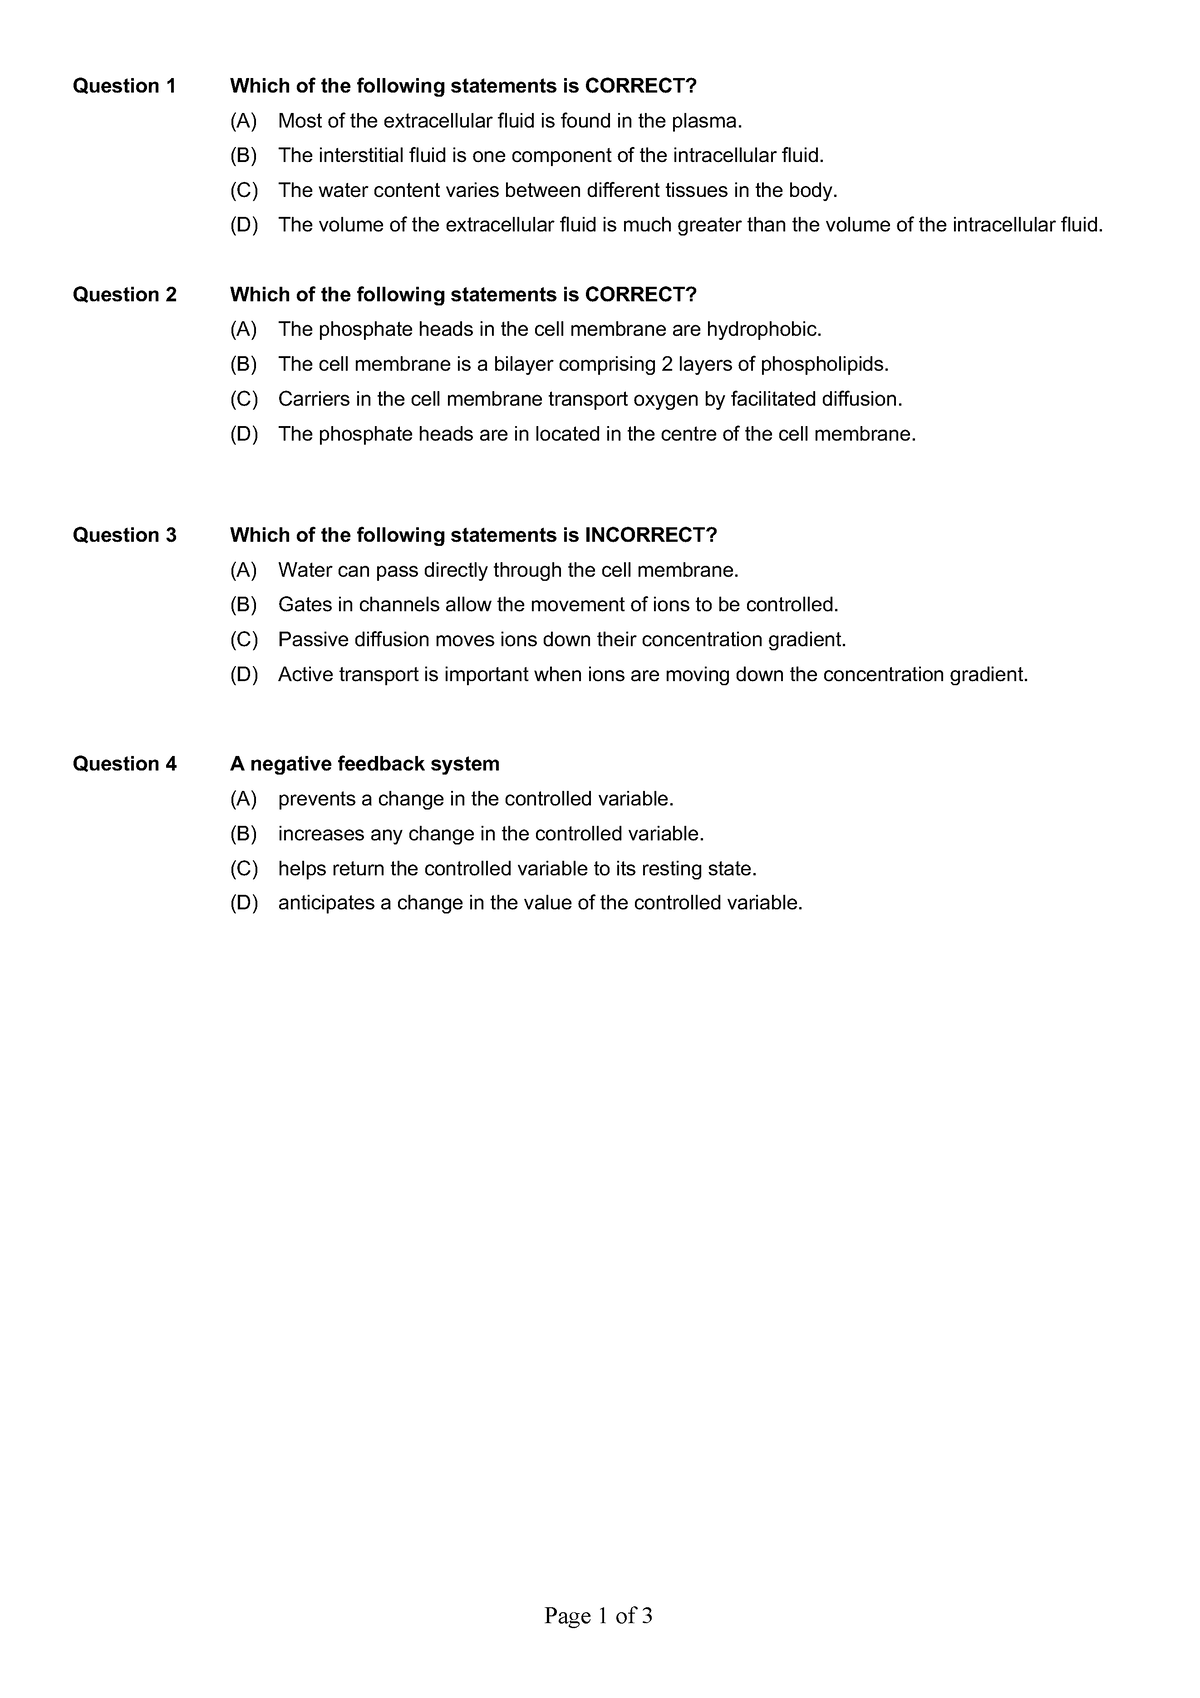 essay questions on homeostasis